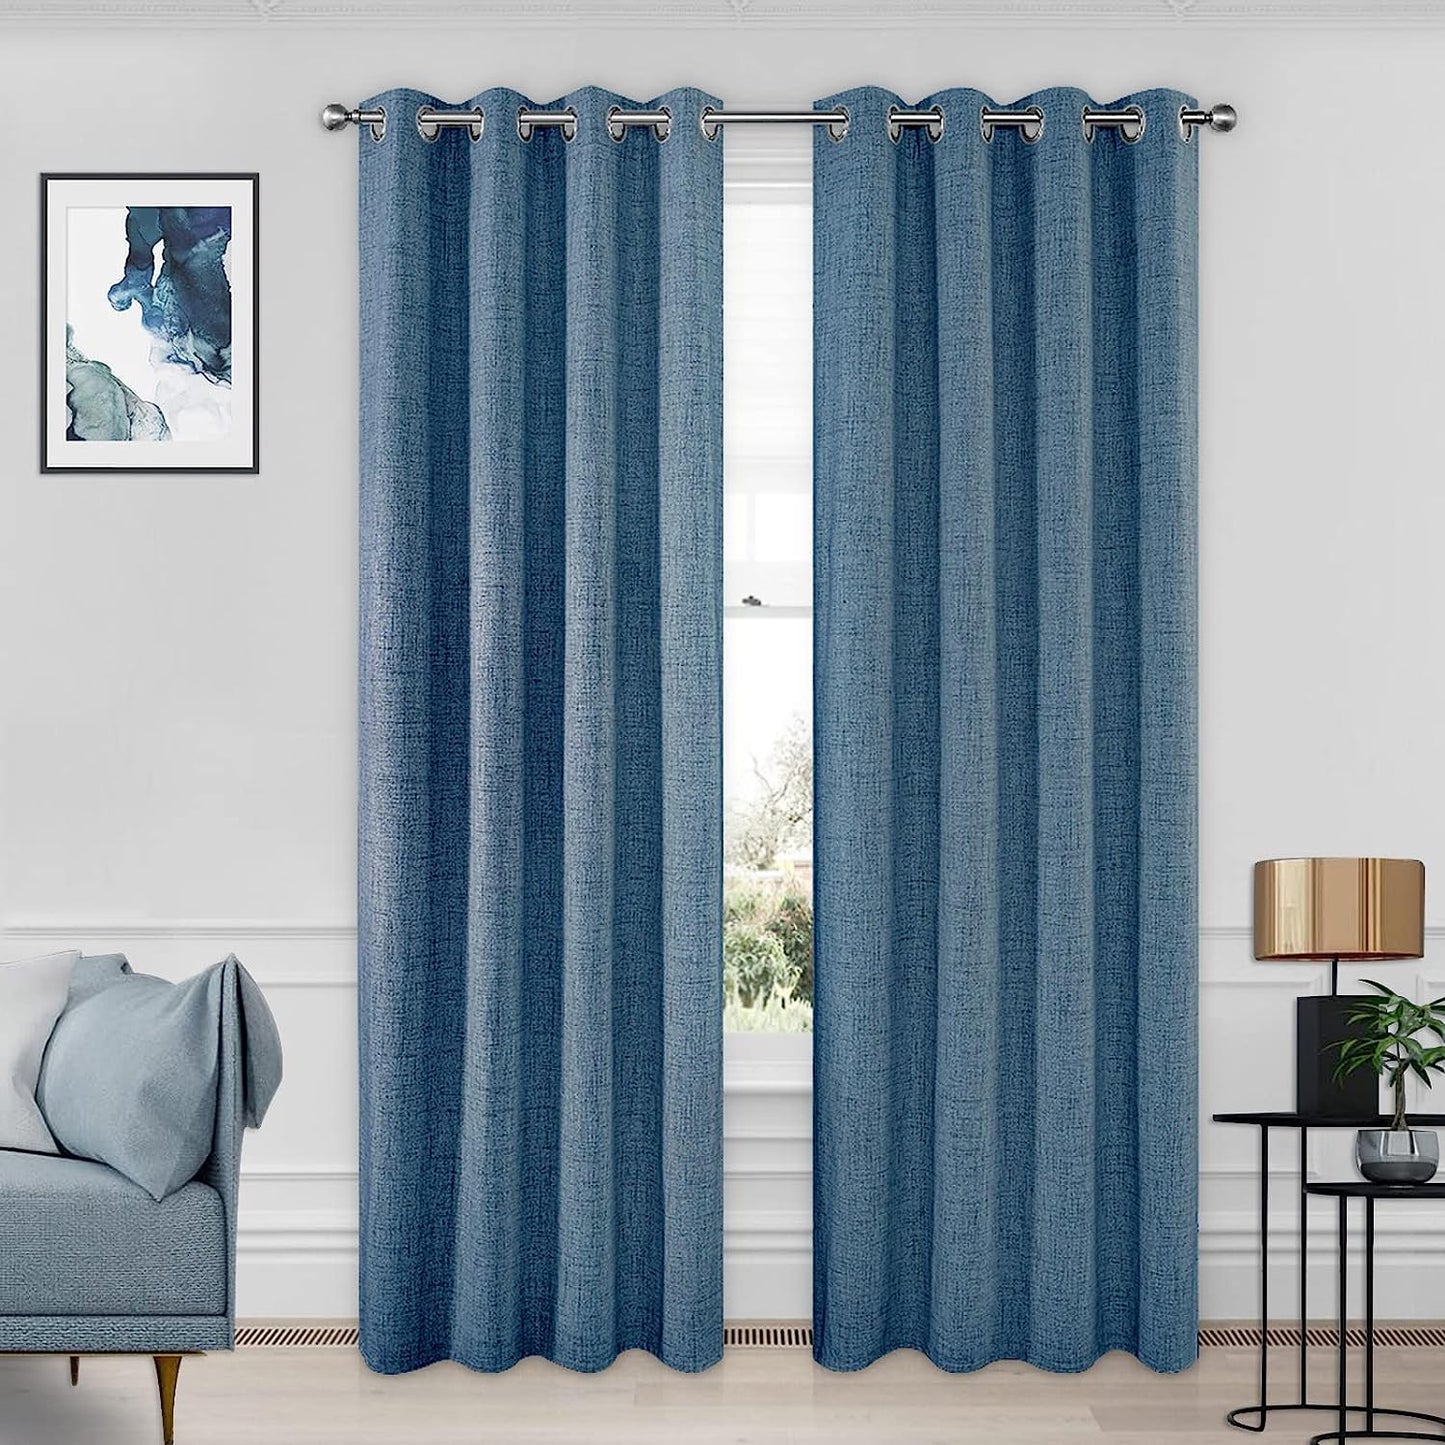 CUCRAF Full Blackout Window Curtains 84 Inches Long,Faux Linen Look Thermal Insulated Grommet Drapes Panels for Bedroom Living Room,Set of 2(52 X 84 Inches, Light Khaki)  CUCRAF Sky Blue 52 X 84 Inches 